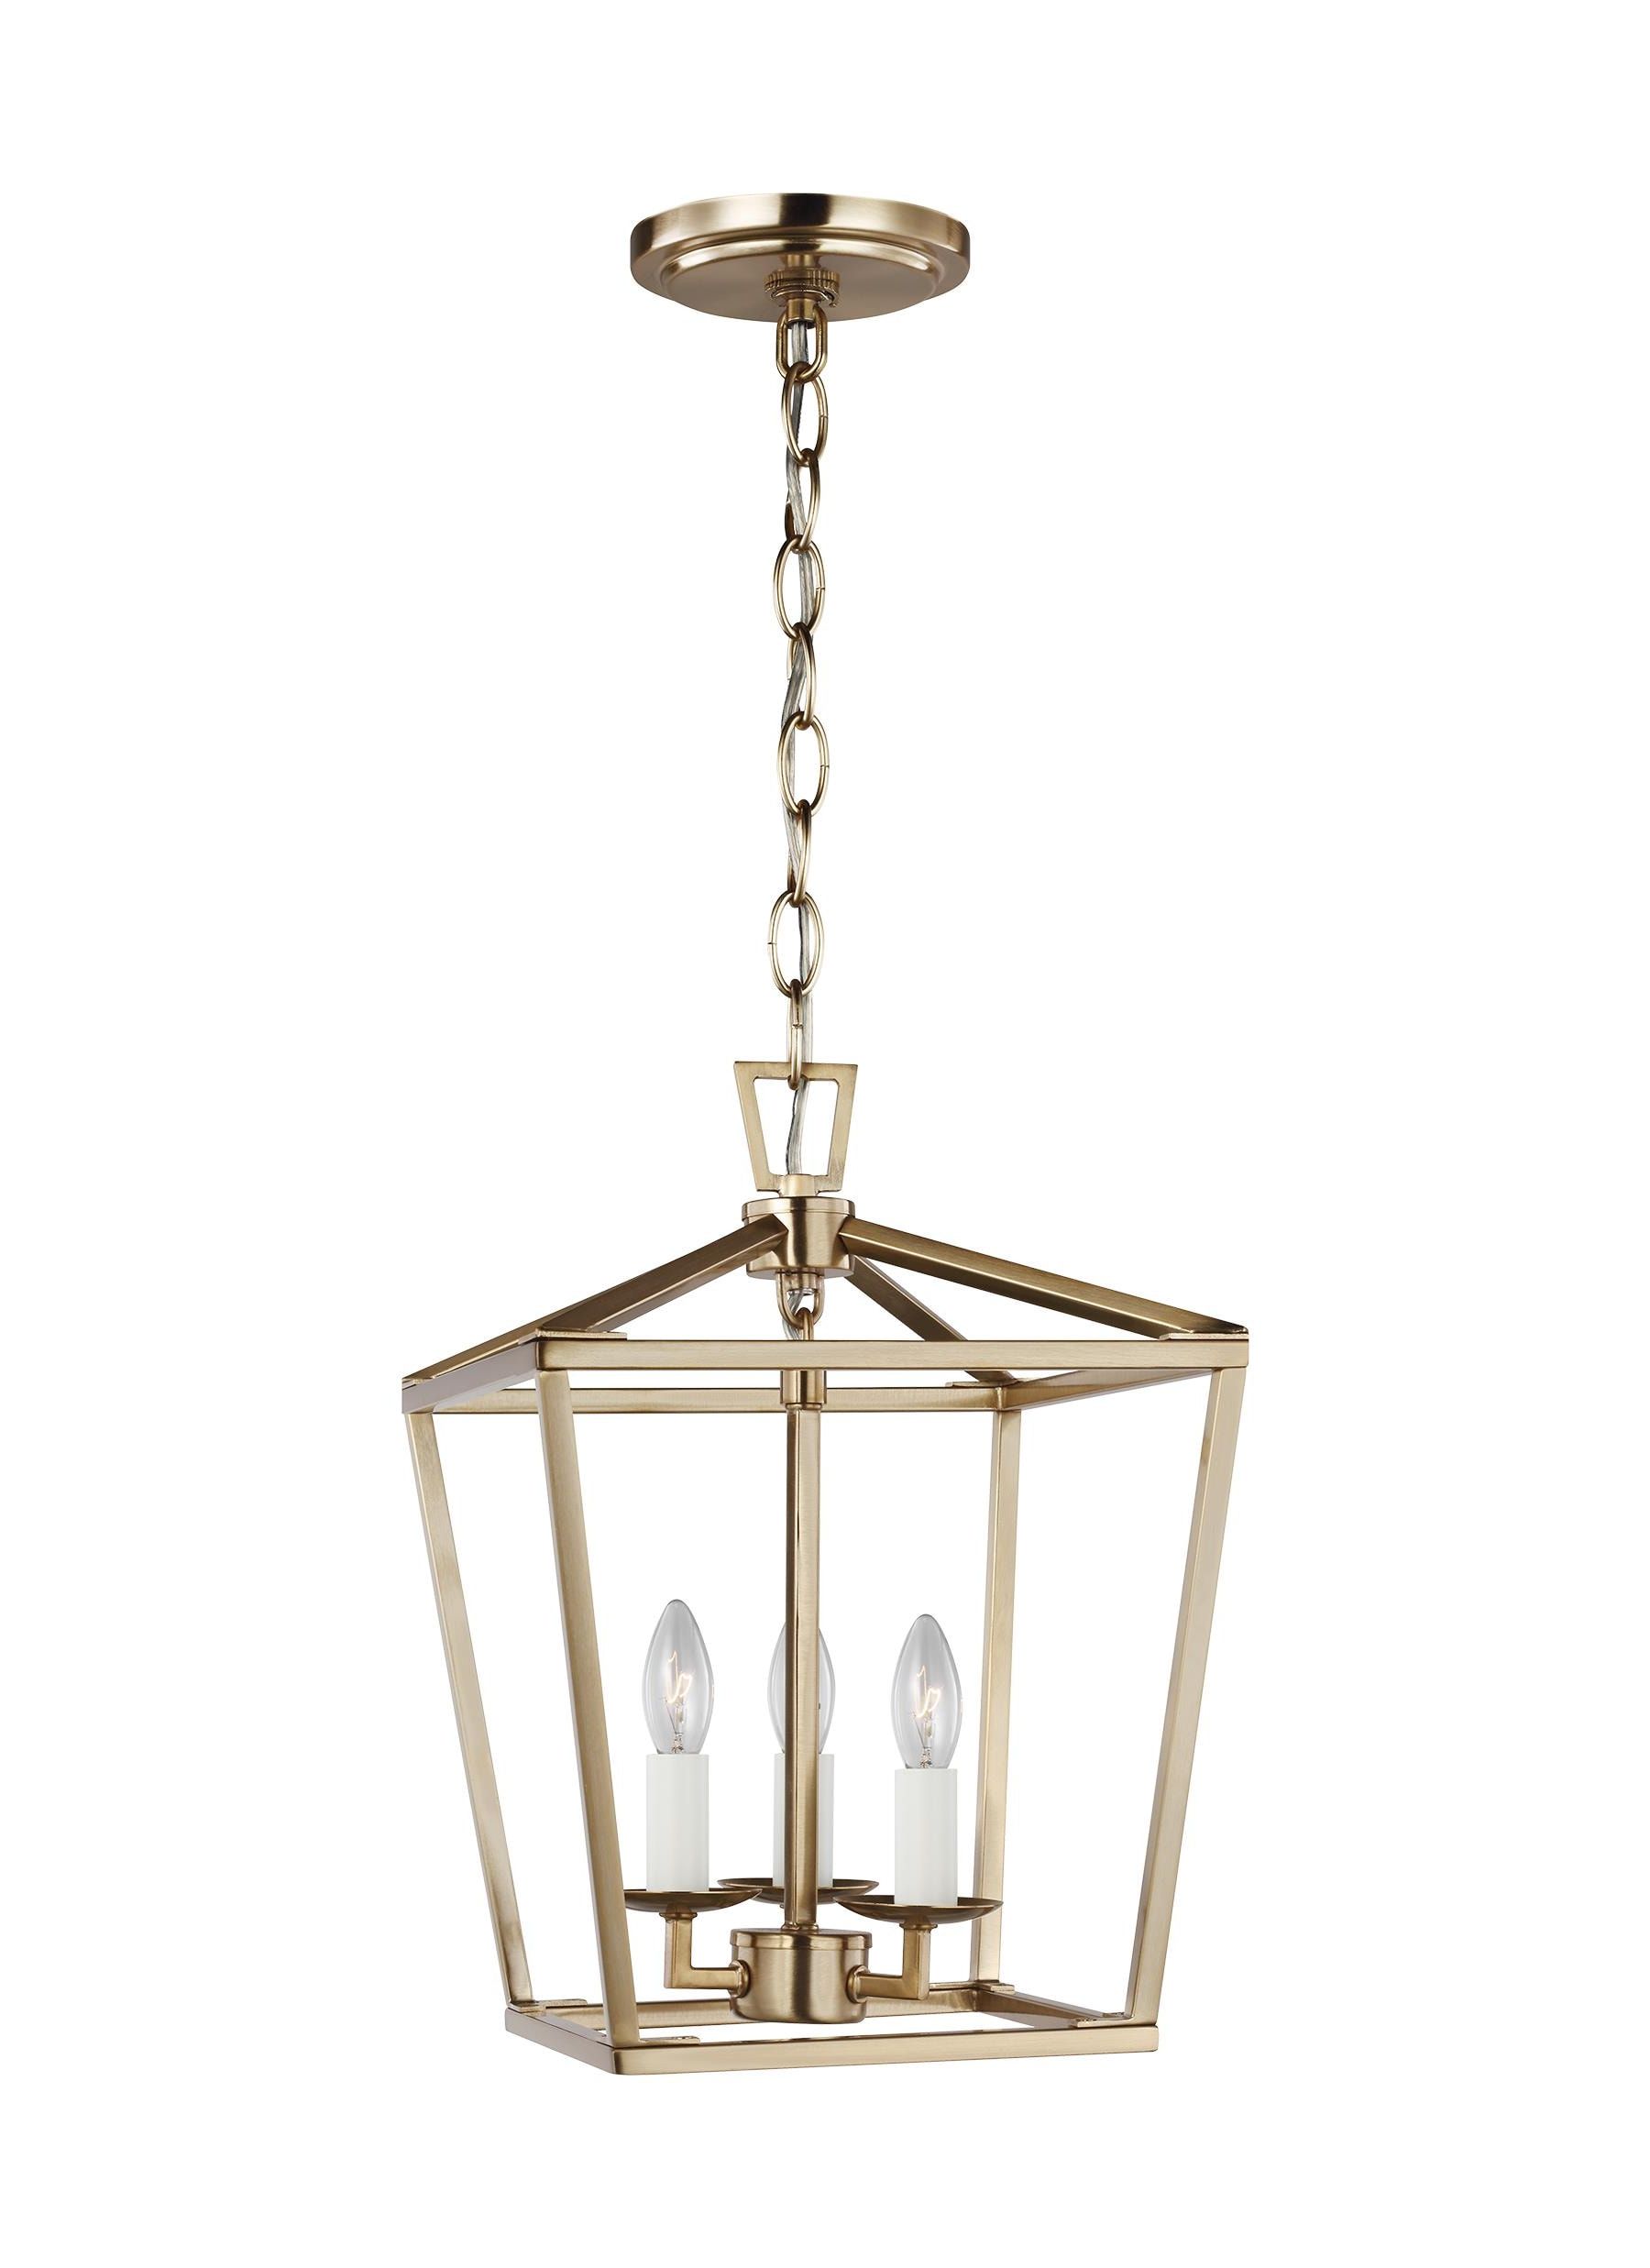 Brass Lantern Chandeliers Within Widely Used Sea Gull Lighting Dianna 3 Light Satin Brass Transitional Lantern Led Mini  Pendant Light In The Pendant Lighting Department At Lowes (View 13 of 15)